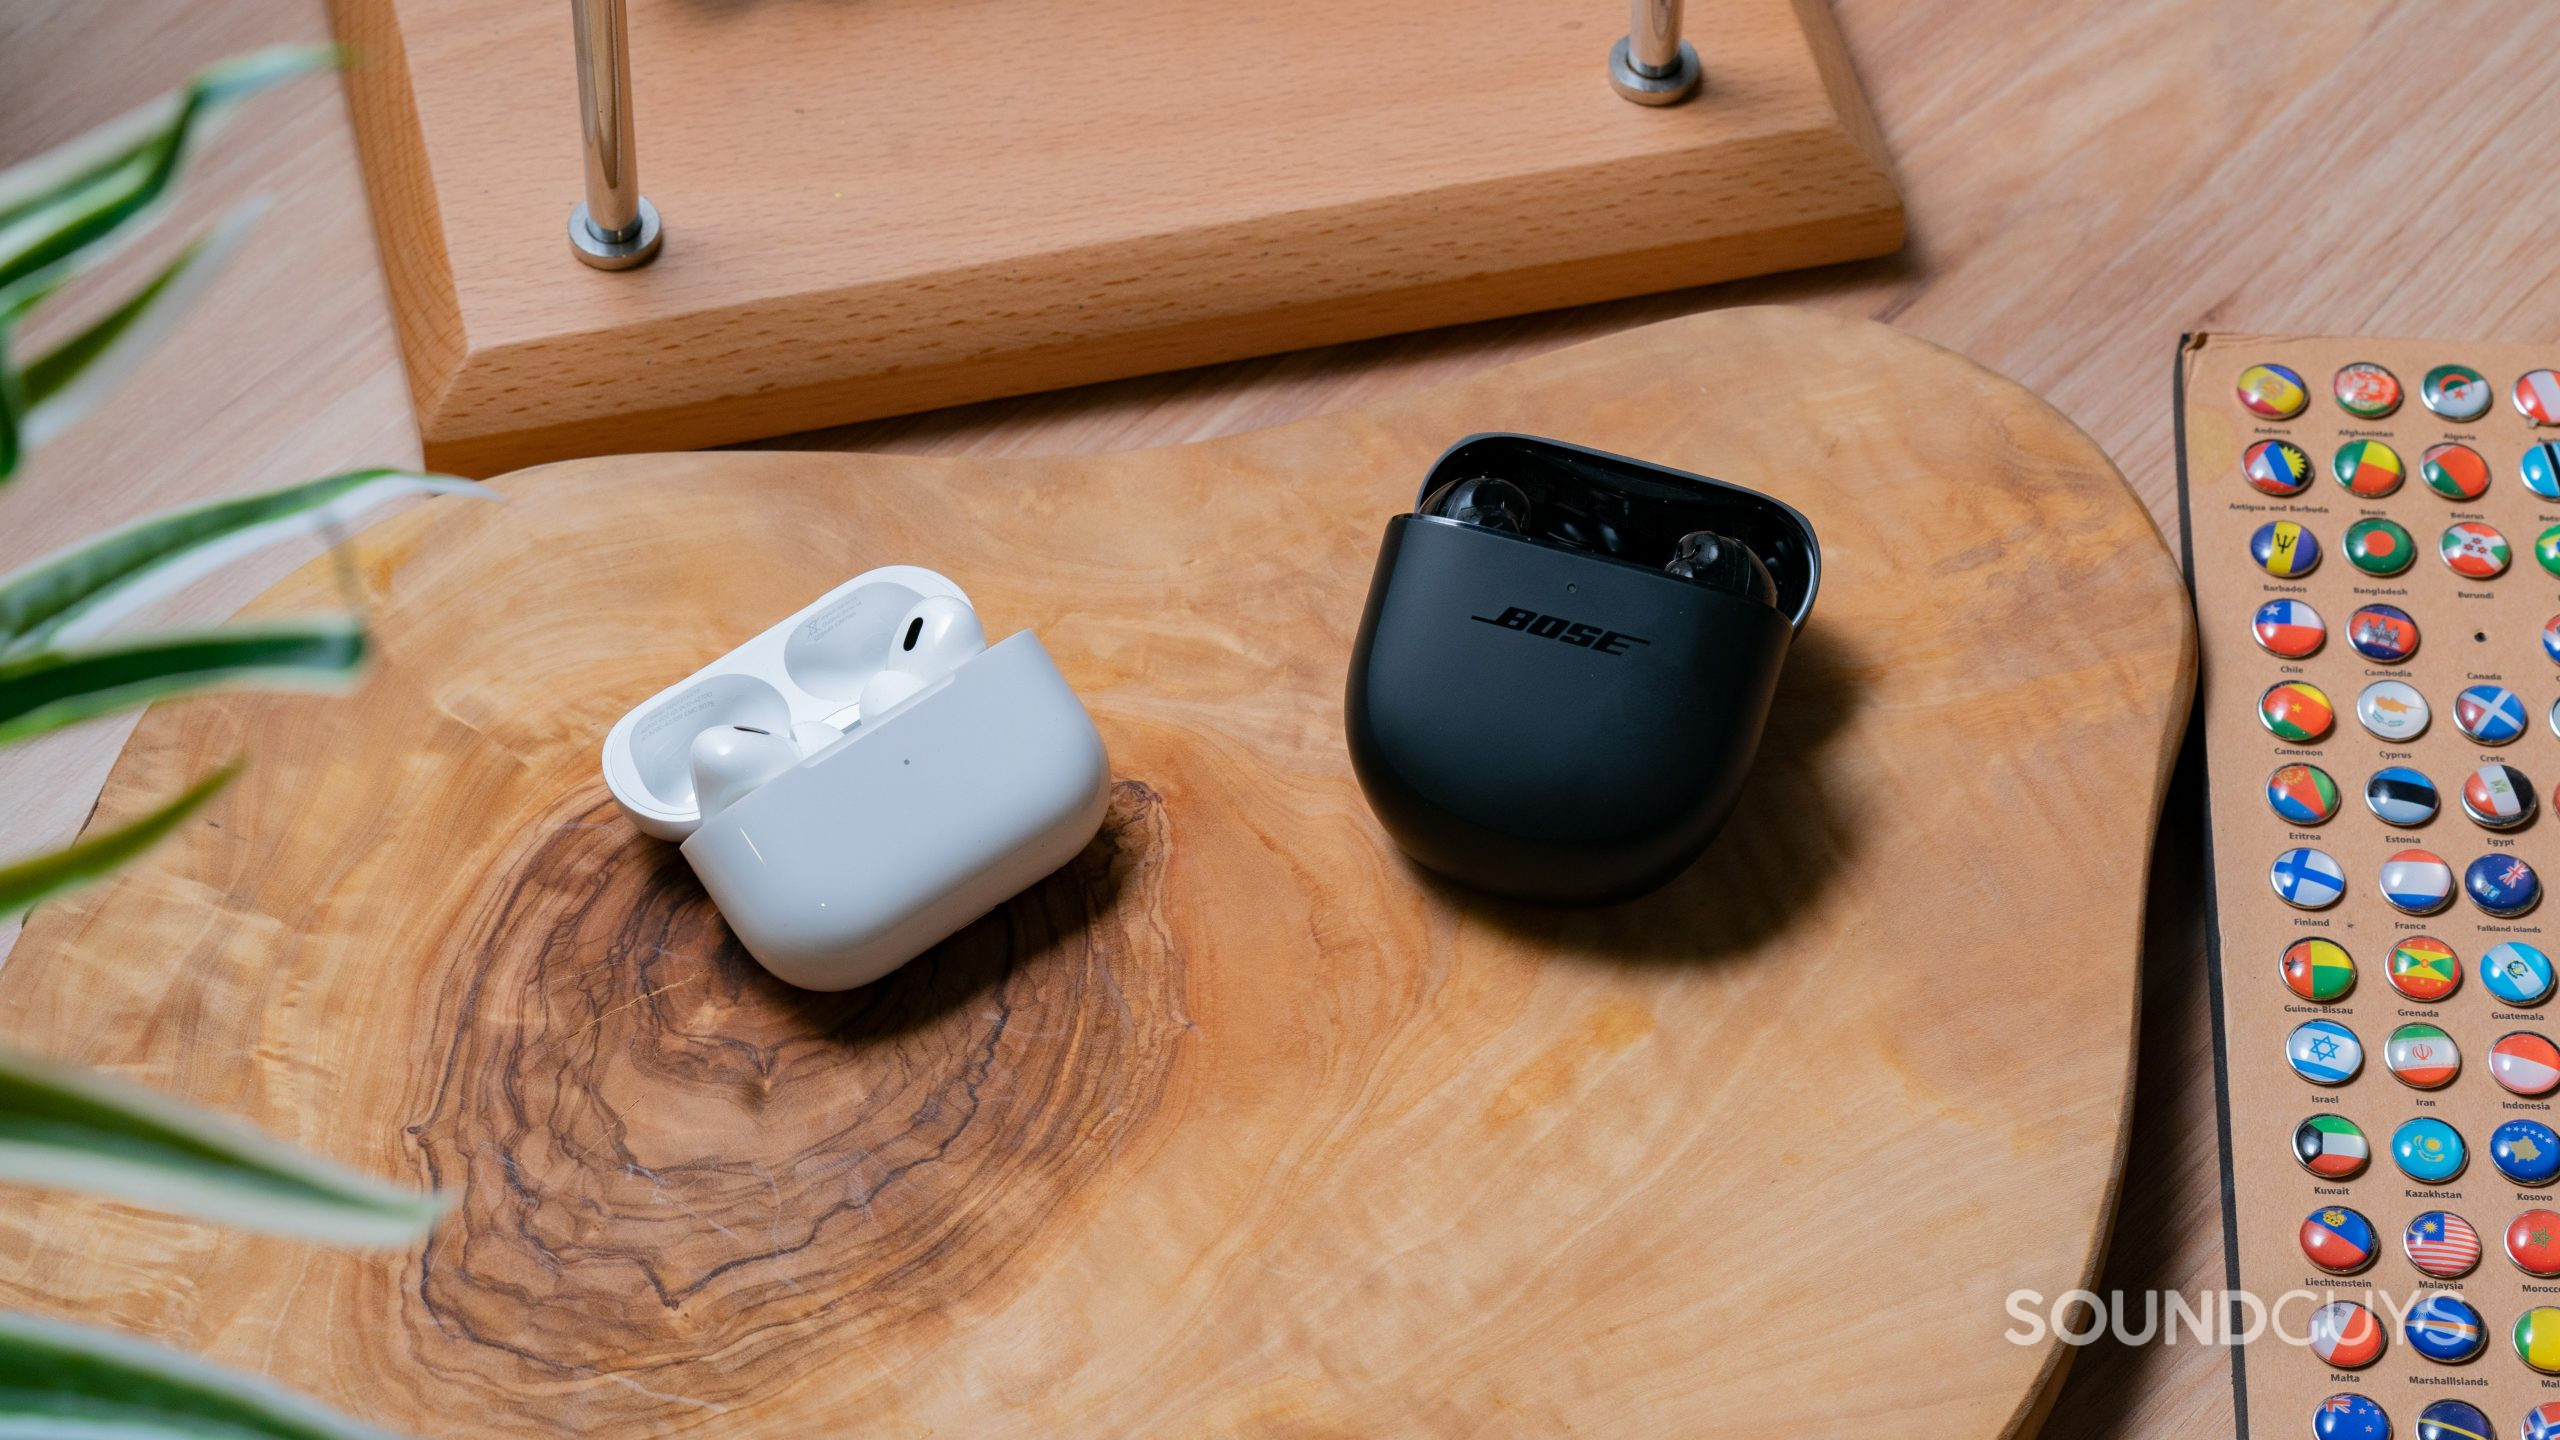 The AirPods Pro (2nd generation) and Bose QuietComfort Earbuds II in each open case beside each other on a wooden slab.